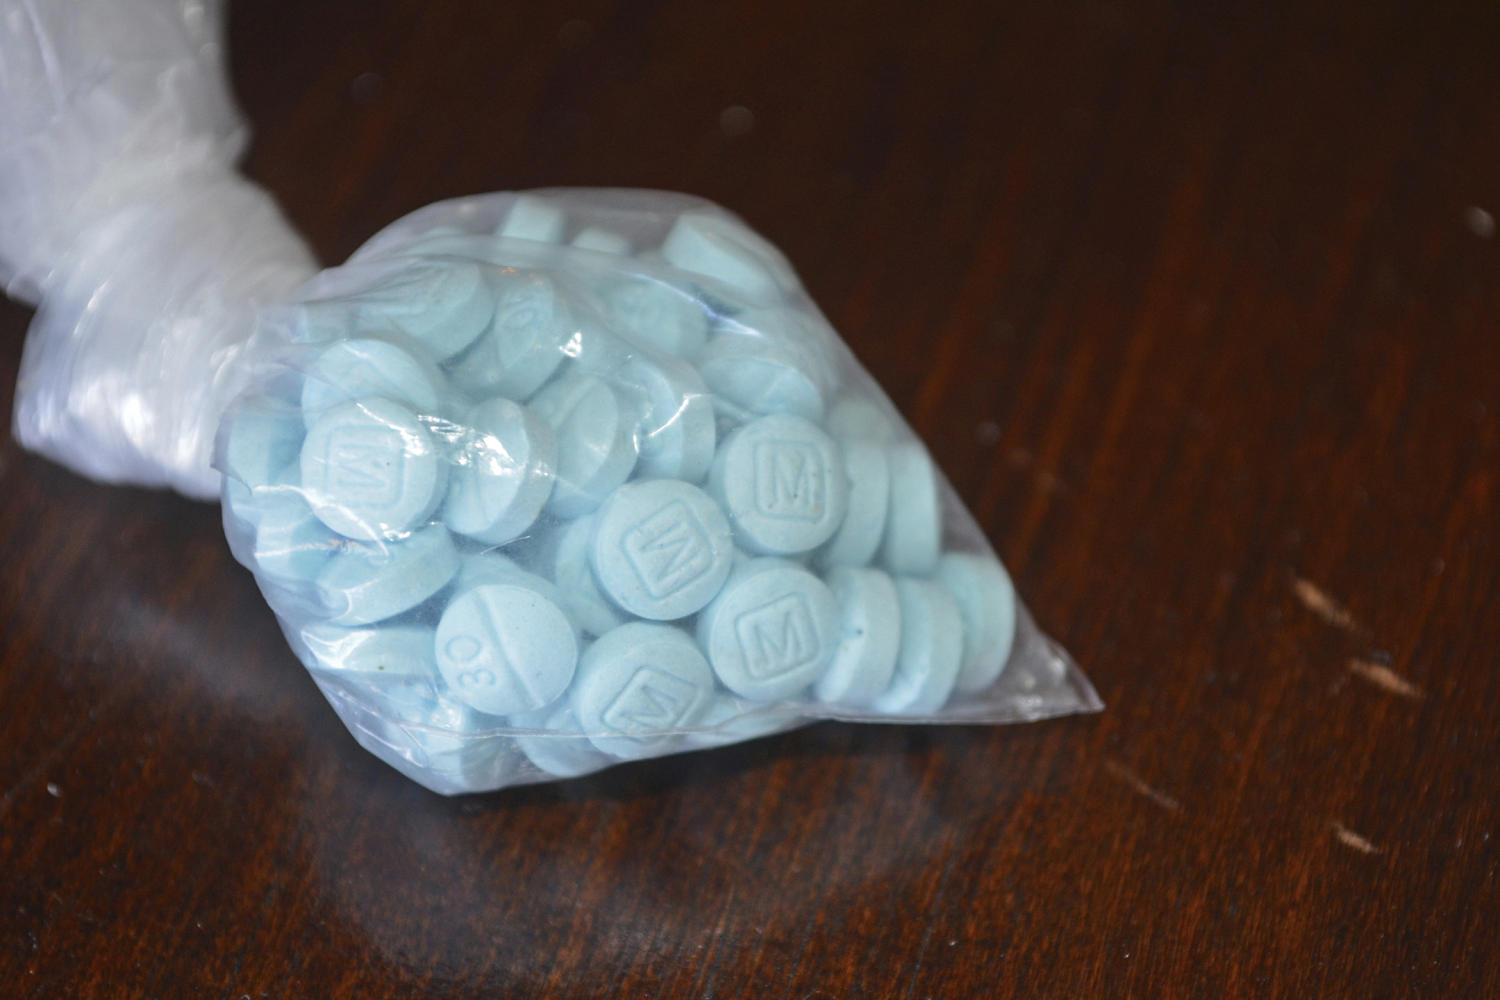 A dangerous new animal sedative is making its way into the illegal drug supply